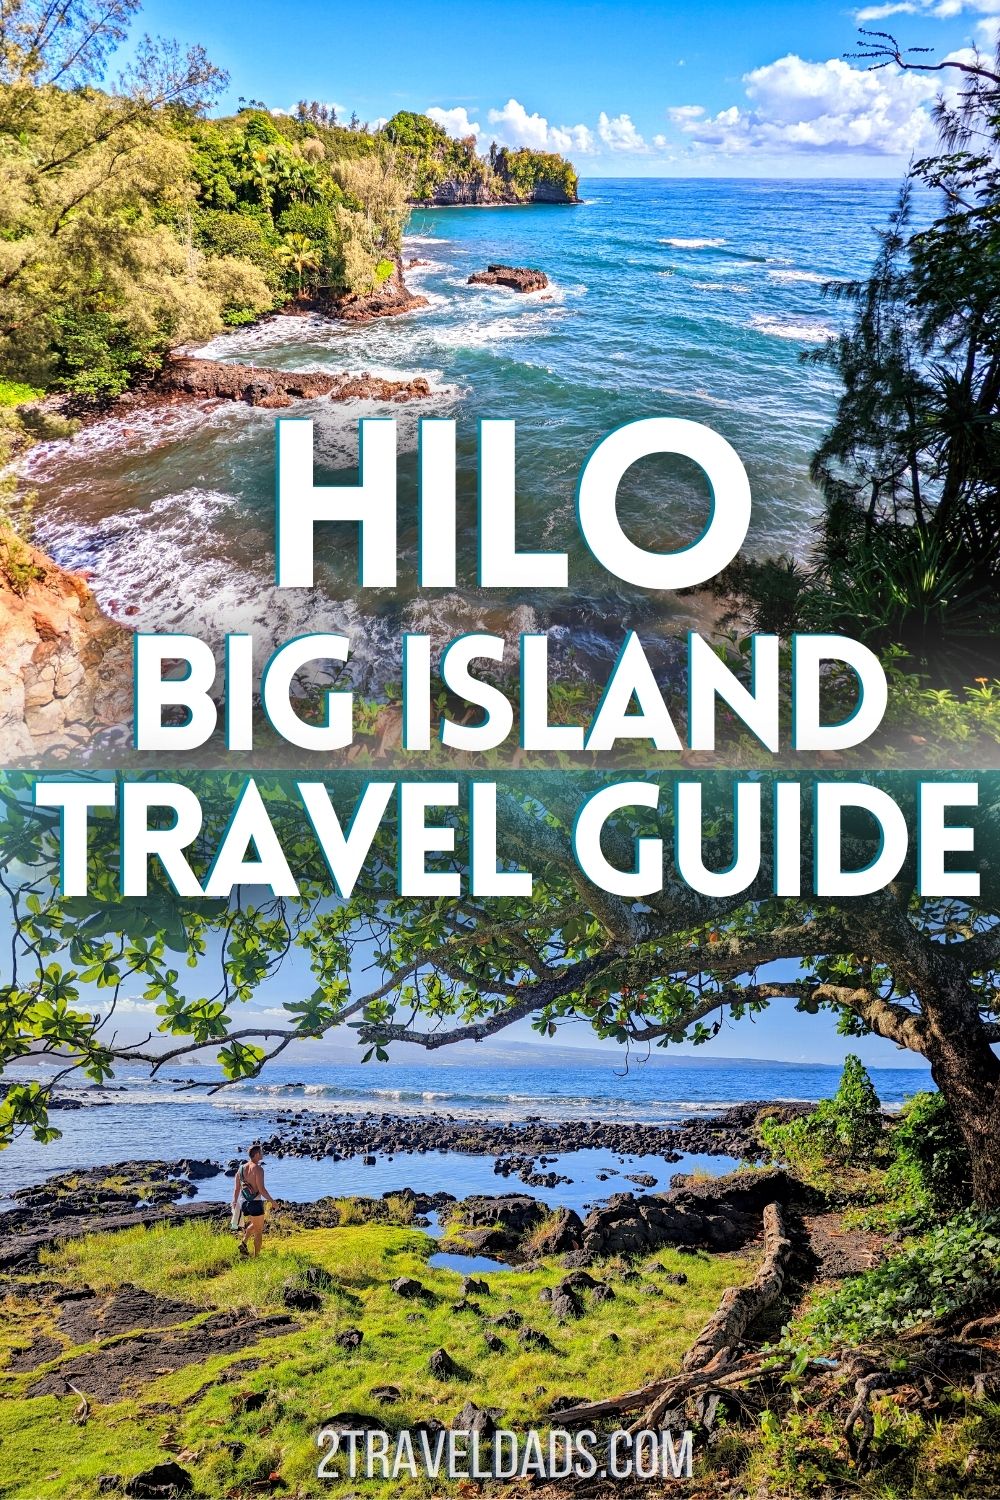 This Hilo Travel Guide is the go-to resource for the best things to do in Hilo, Hawaii from waterfalls to where to shop and support locally. Where to eat in Hilo, tour recommendations and what to add to your Hilo itinerary.